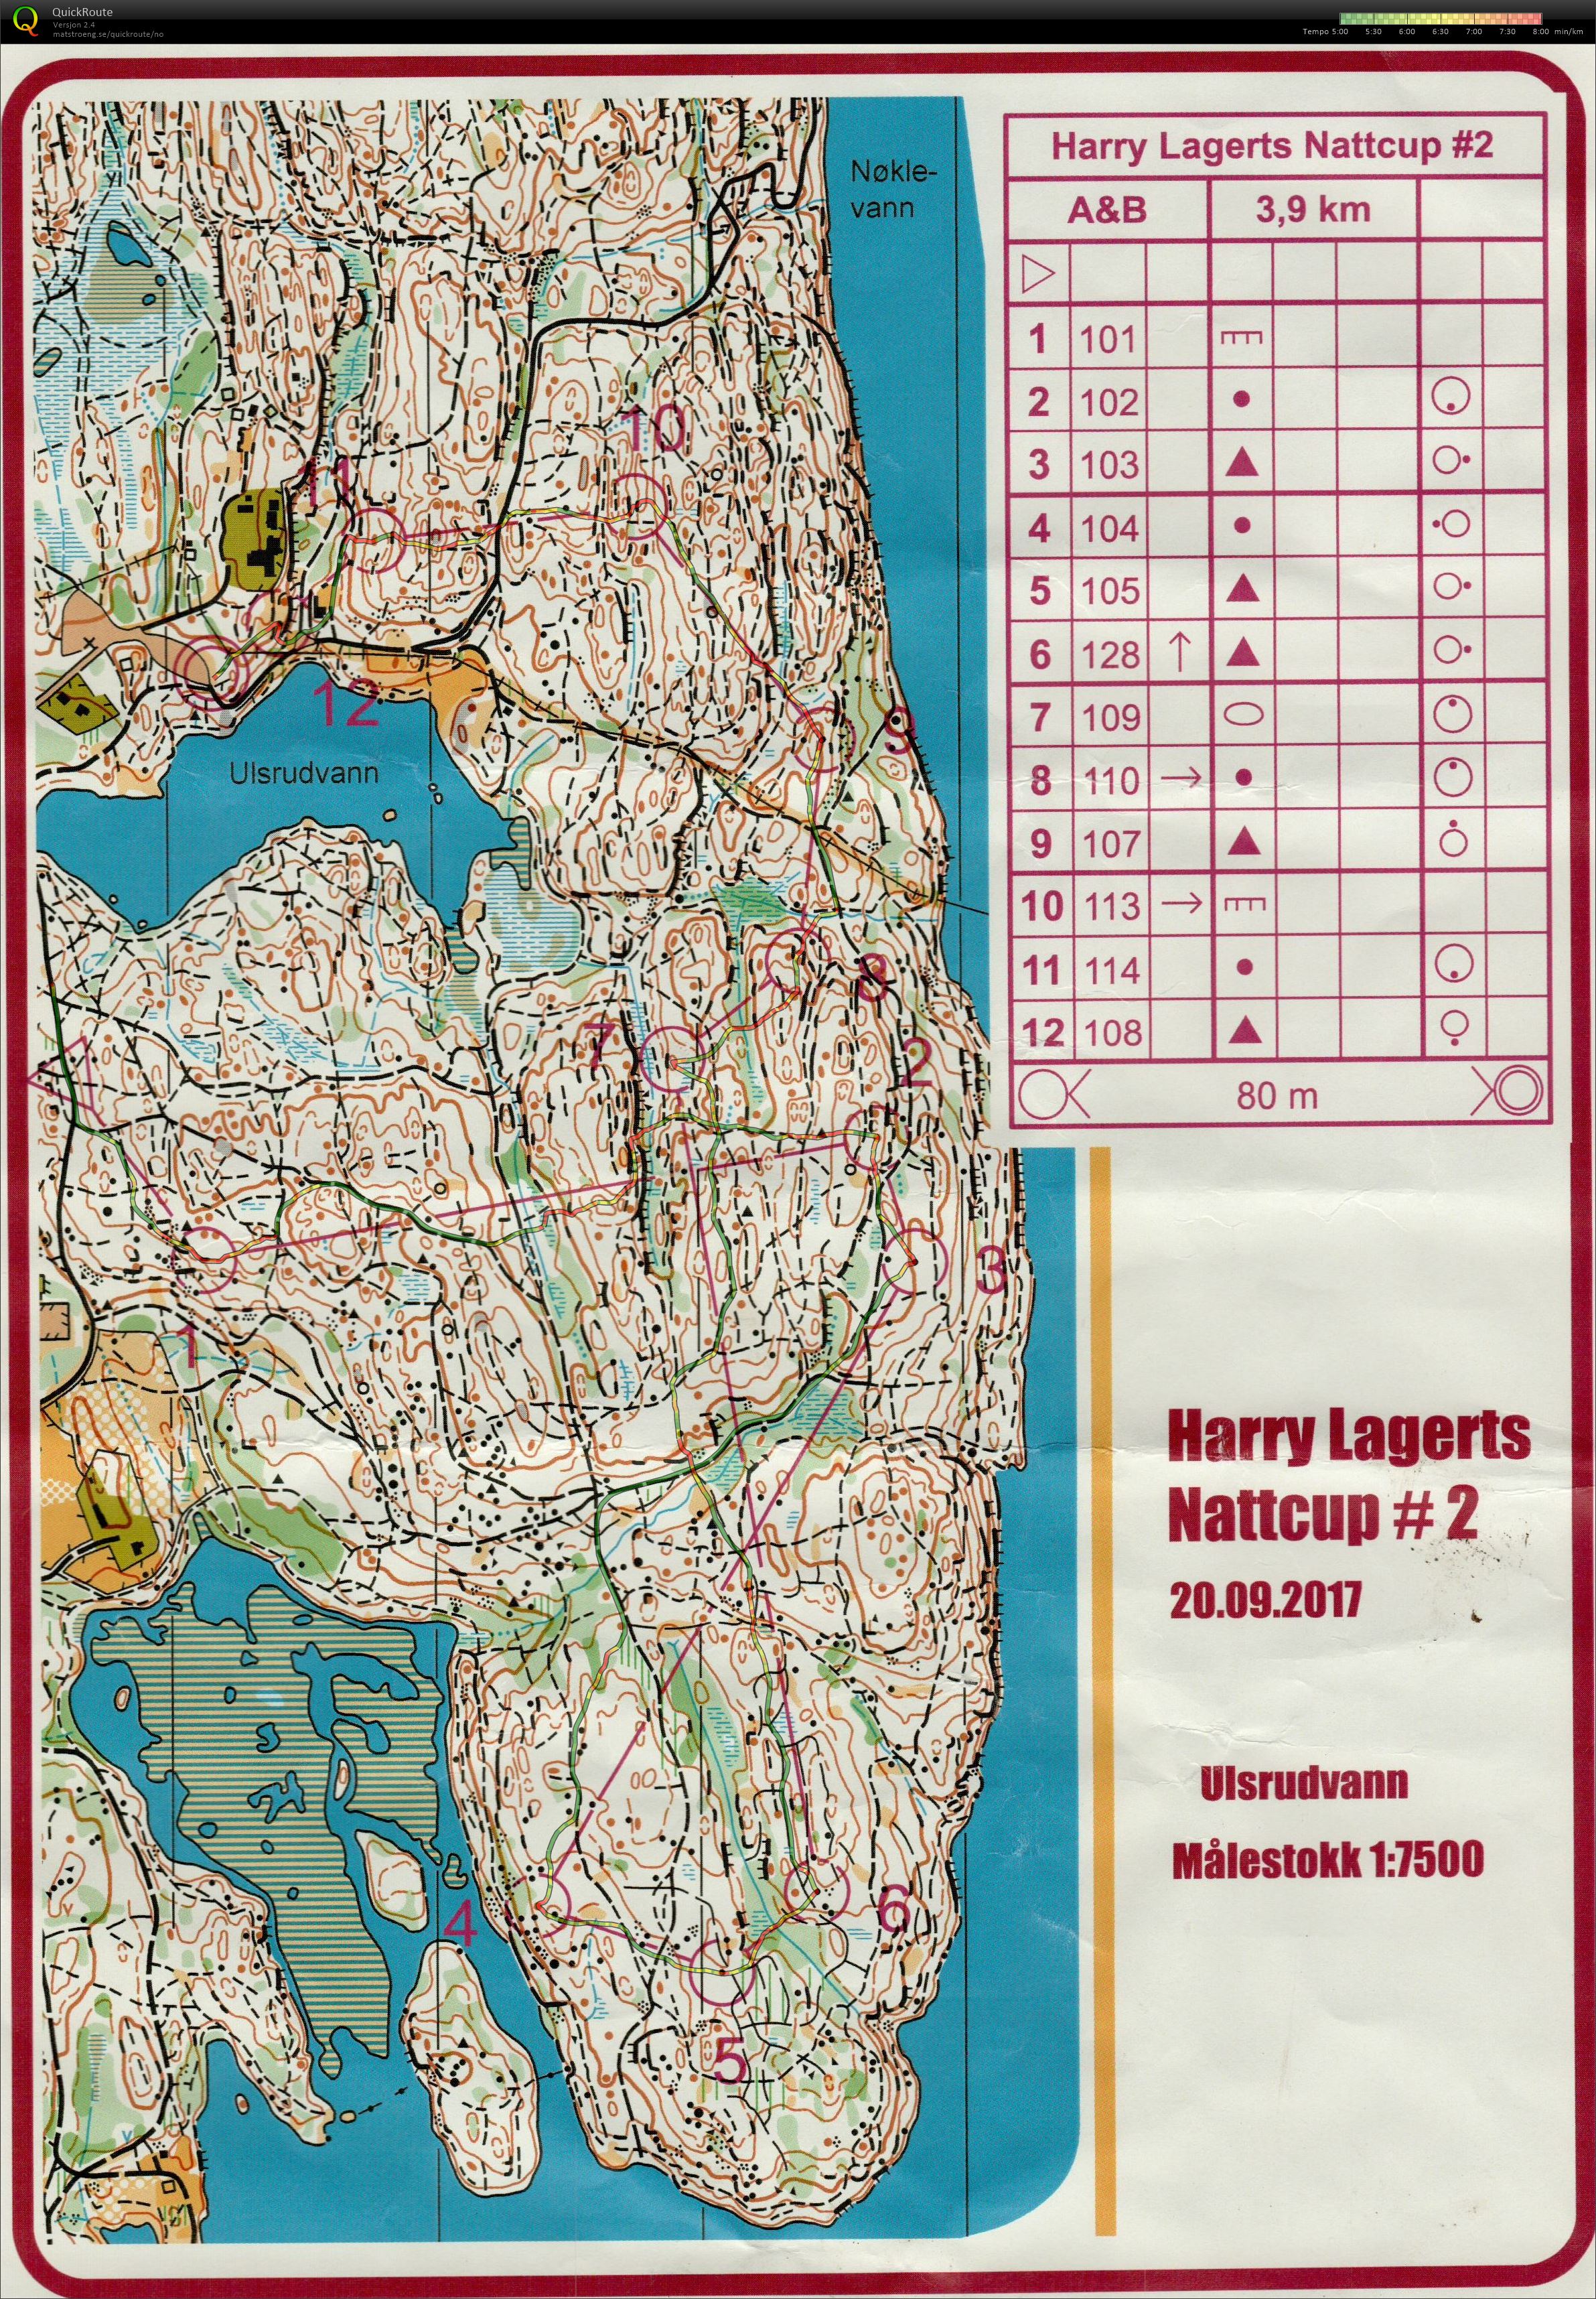 Harry Lagerts Nattcup #2 (20.09.2017)